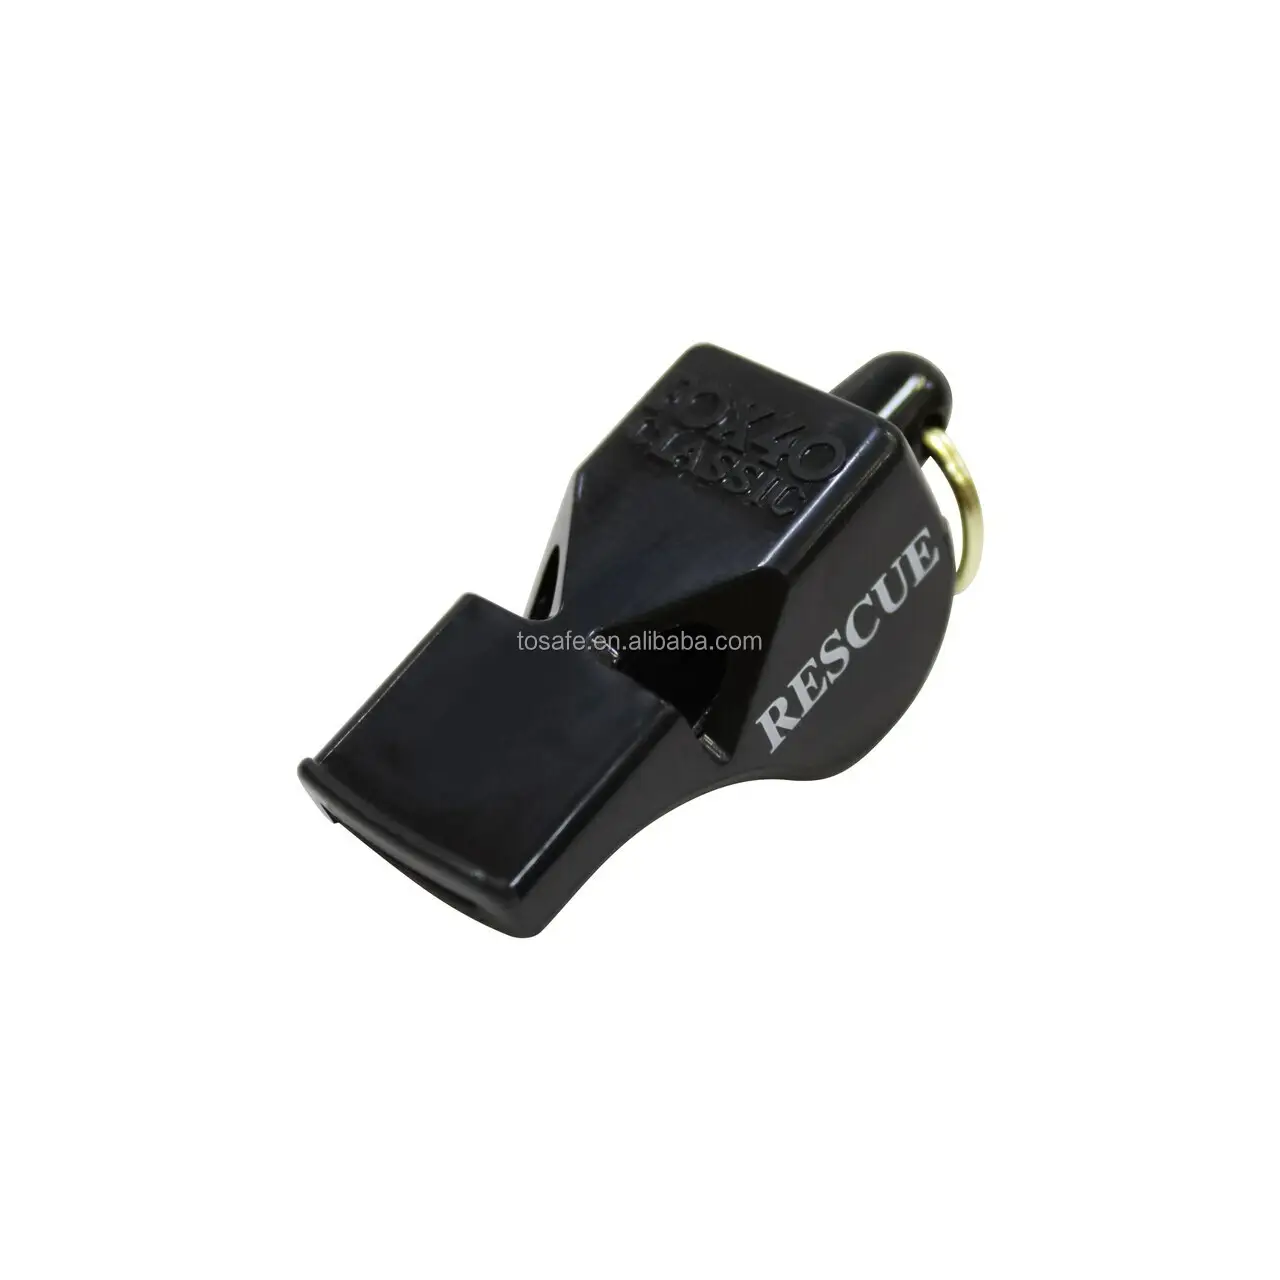 PC Material Classic Safety Whistle for referees, coaches, rescue, general safety personnel